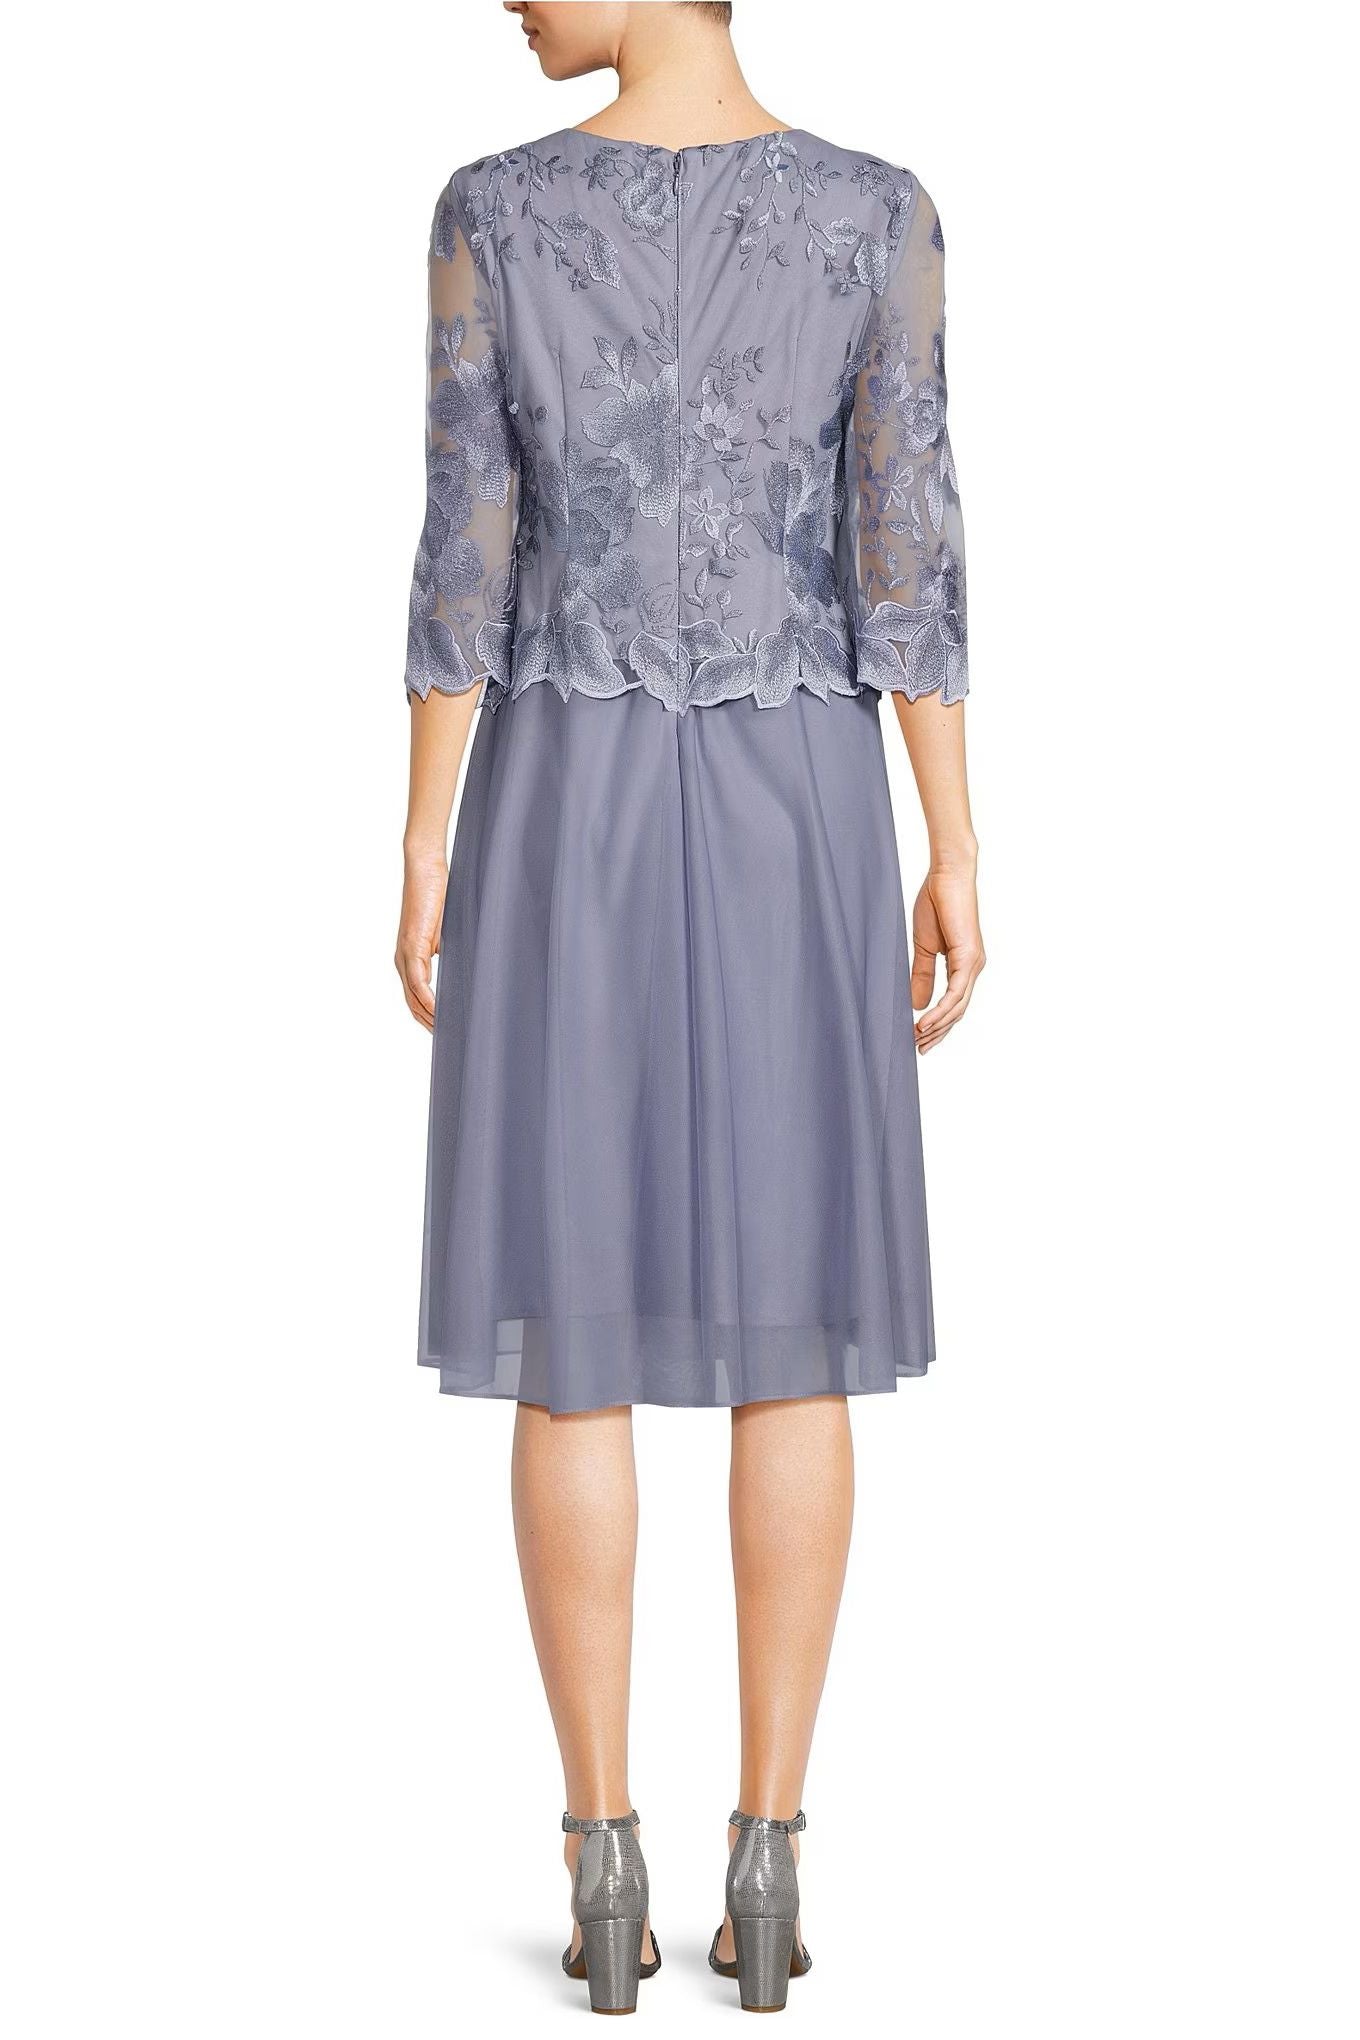 Alex Evenings Floral Embroidered Bodice Stretch Mesh Dress